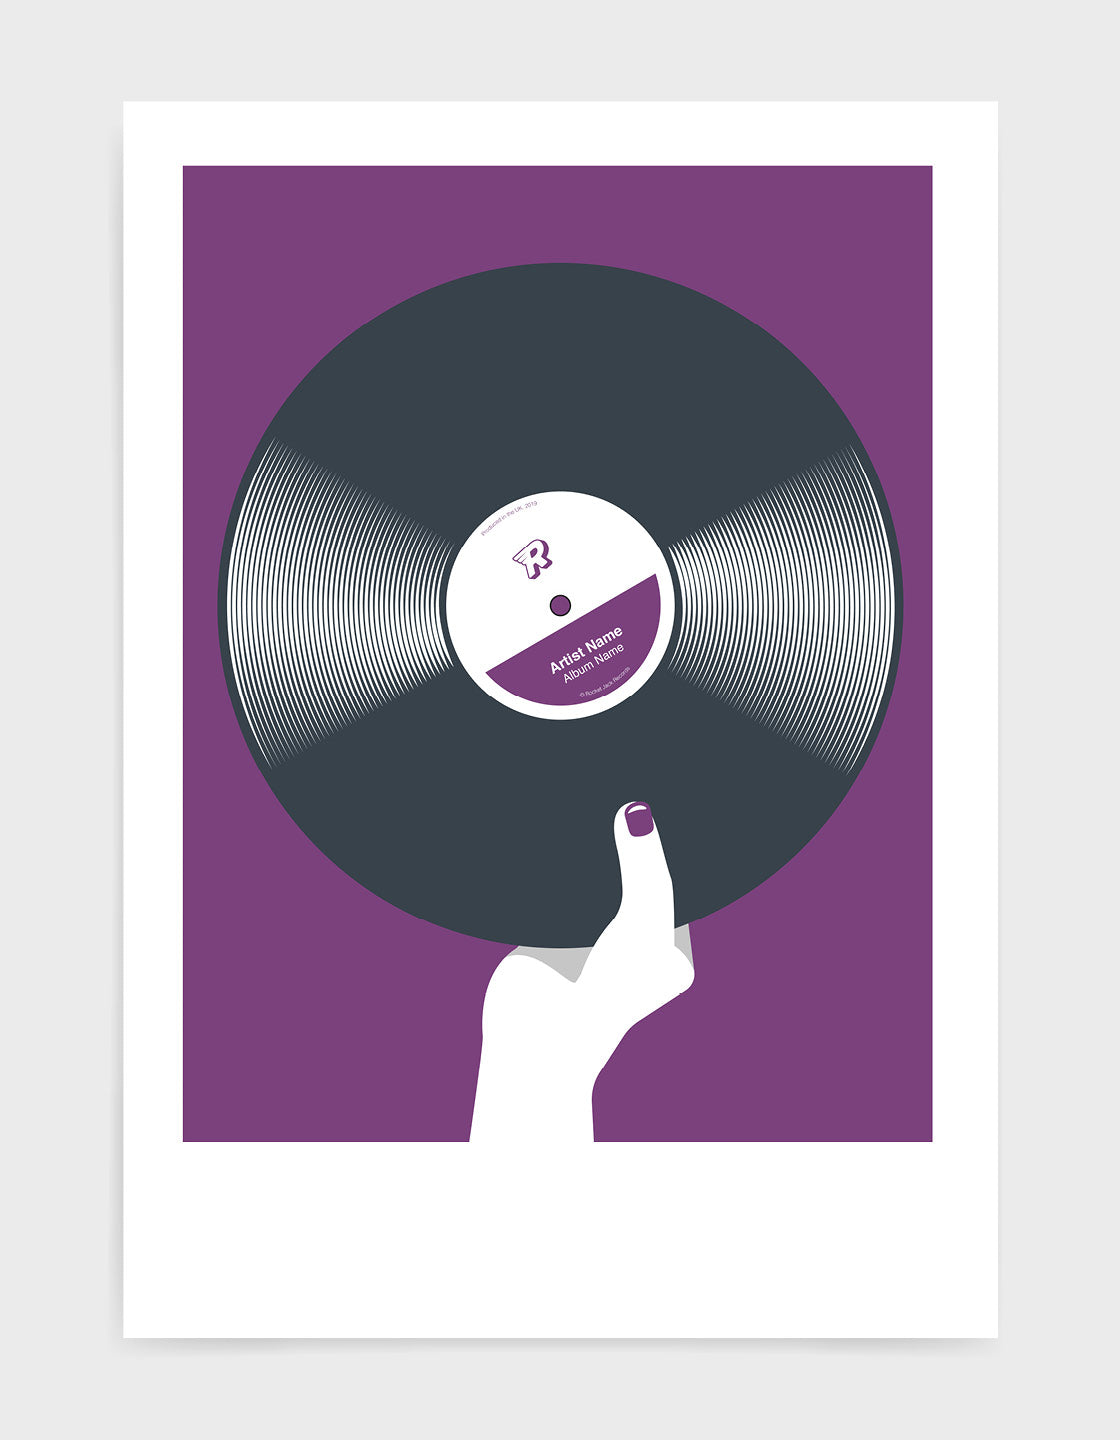 art print image of a Personalised black vinyl record held in a hand with red nails against a violet background